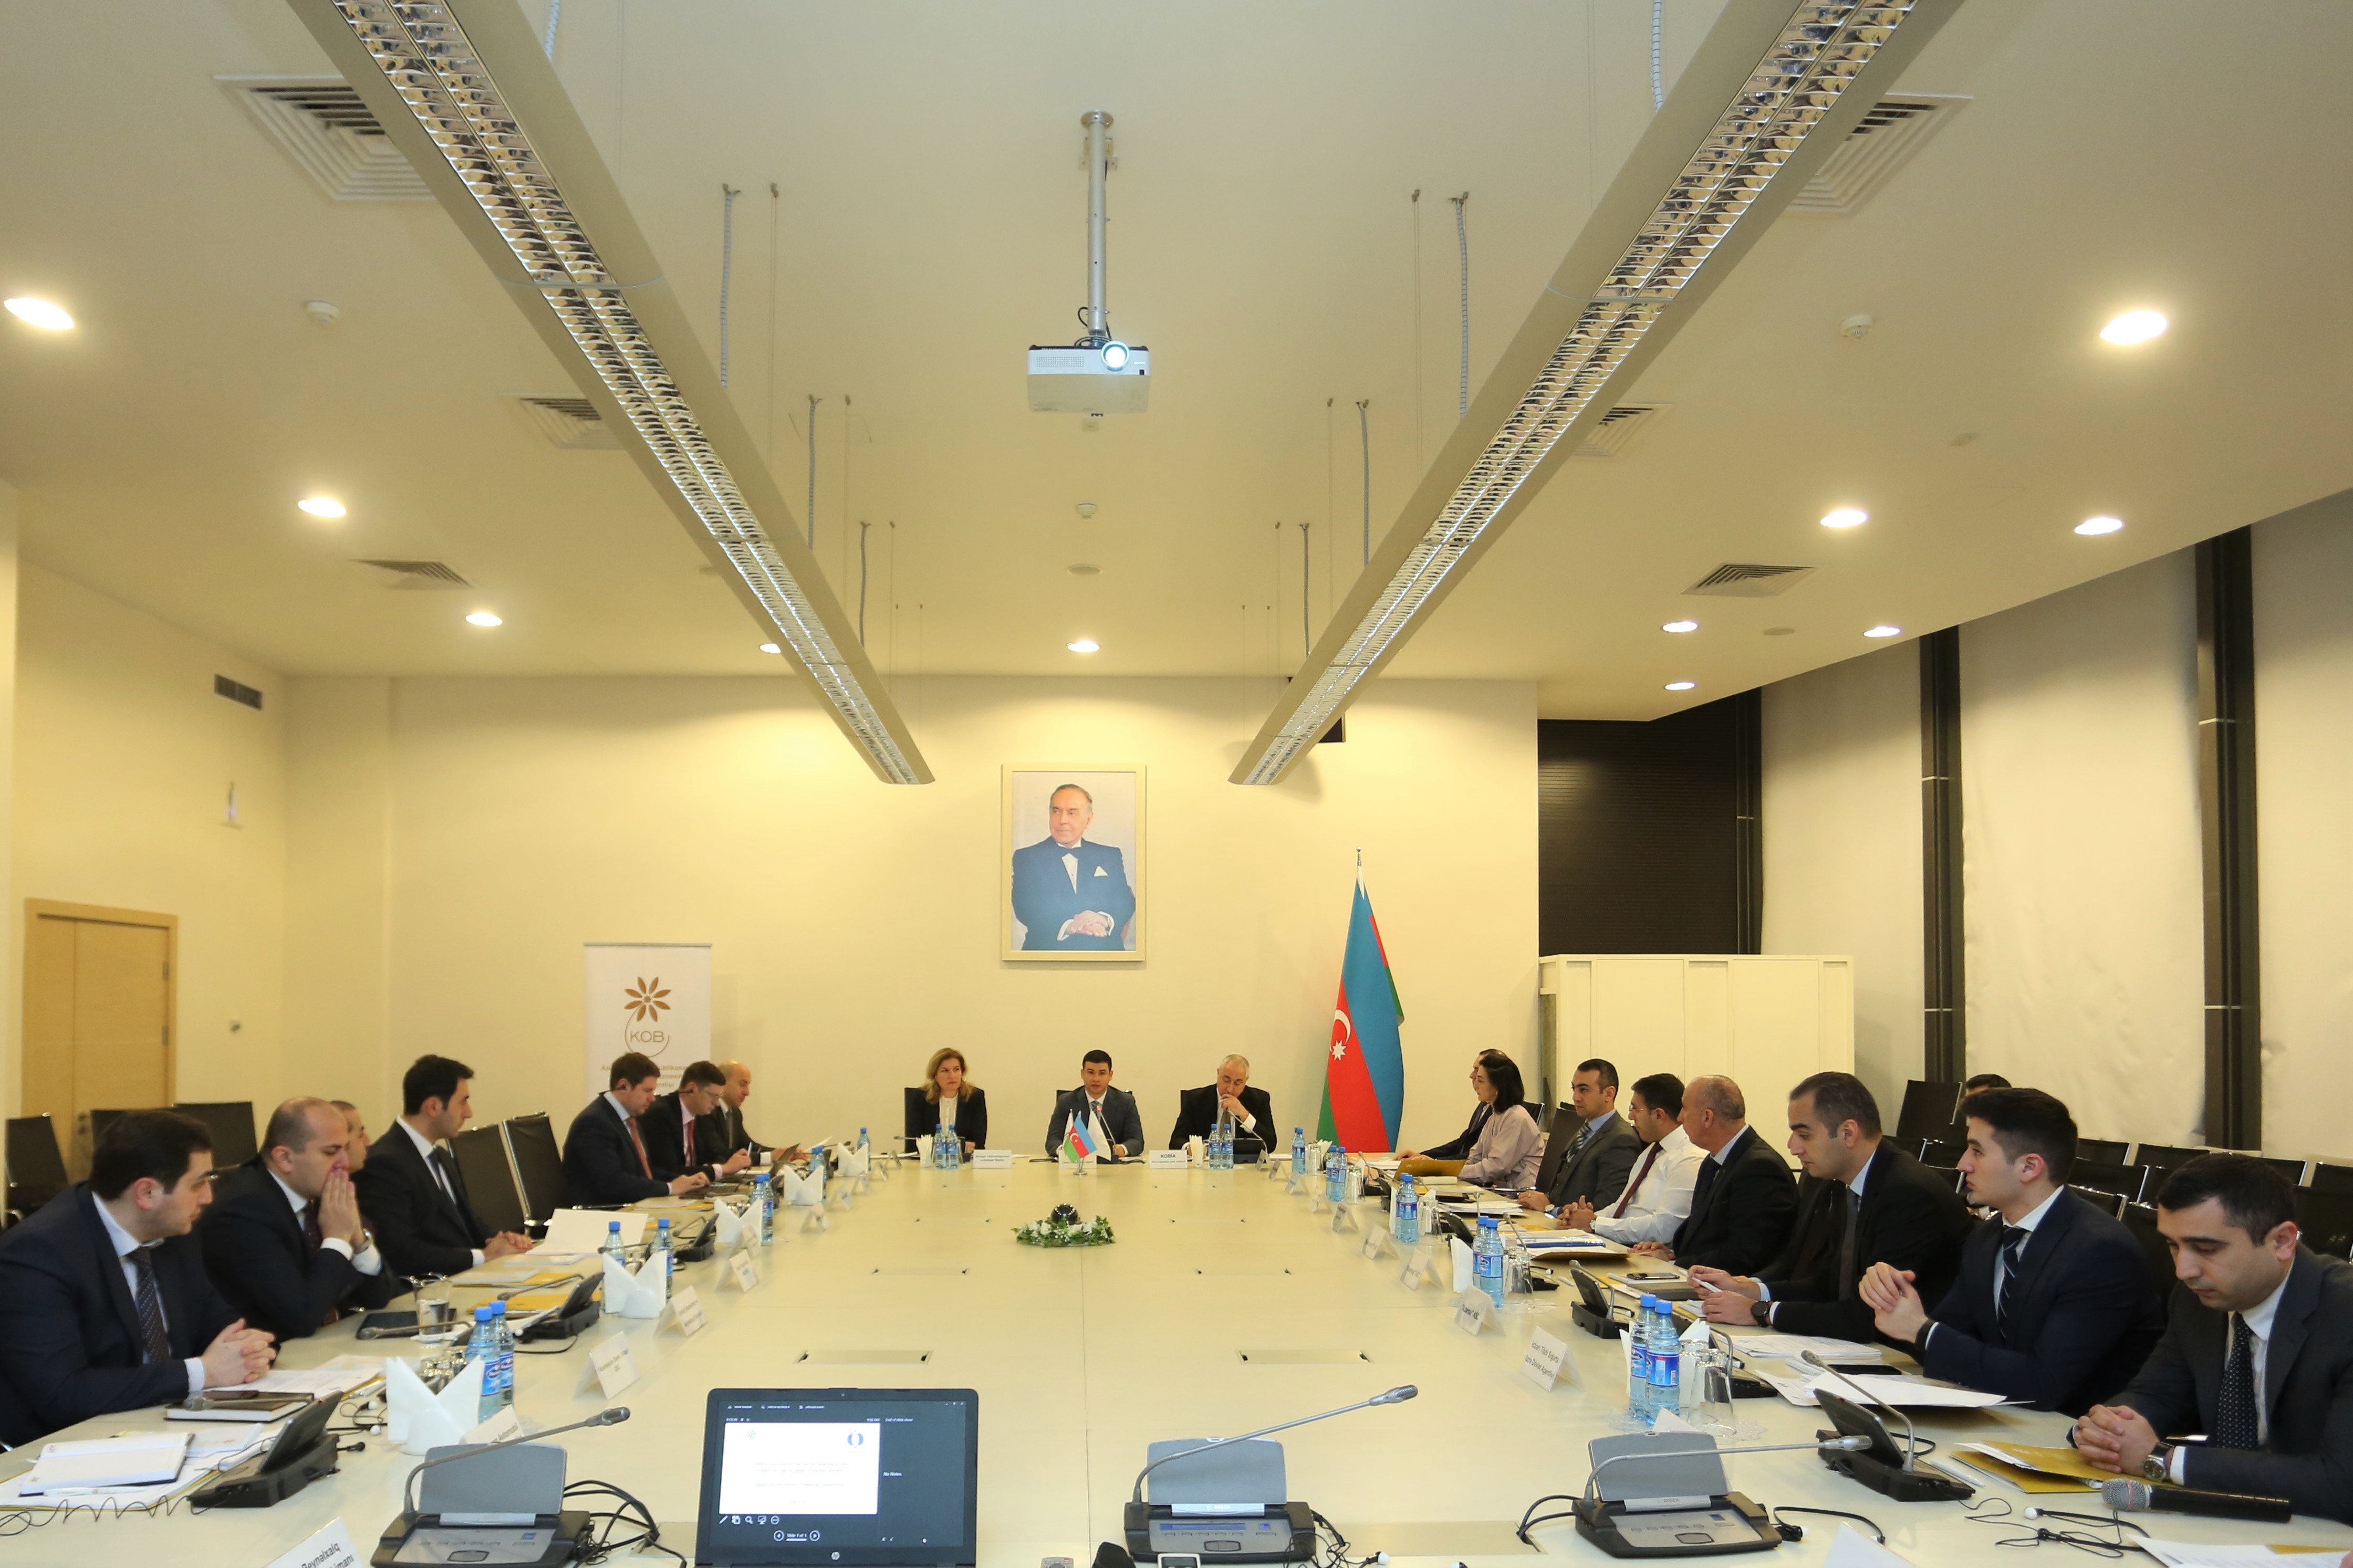 Presentation held on Conceptual Framework Document for the Public-Private Partnership held 